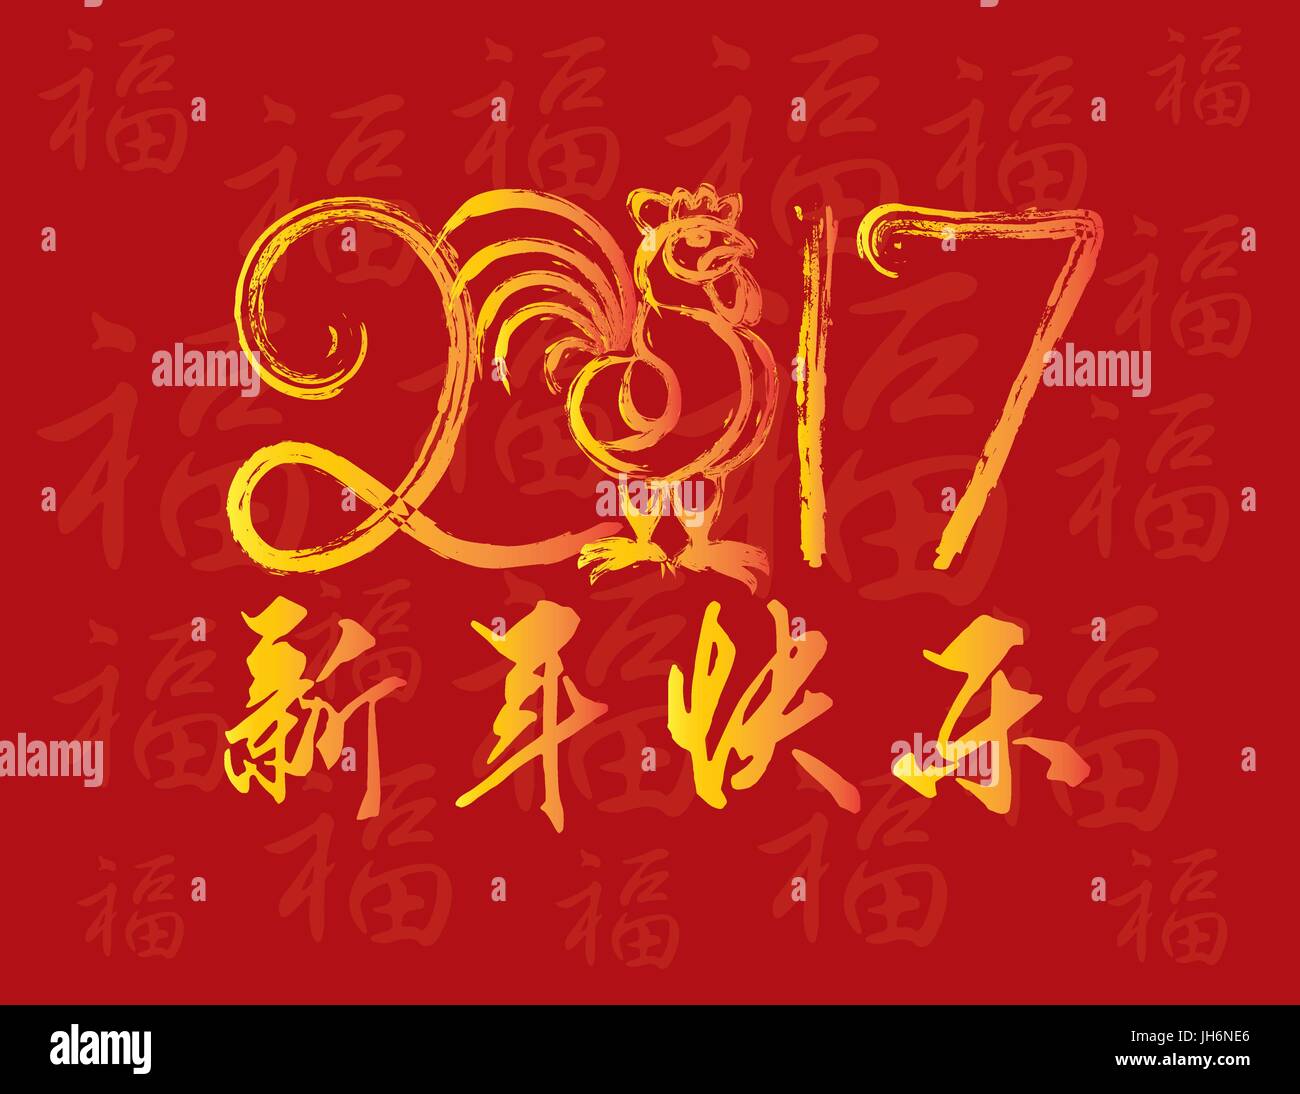 Chinese Lunar New Year of the Rooster Black and White Ink Brush with 2017 Numerals on Red Background with Happy New Year Chinese Text Illustration Stock Vector